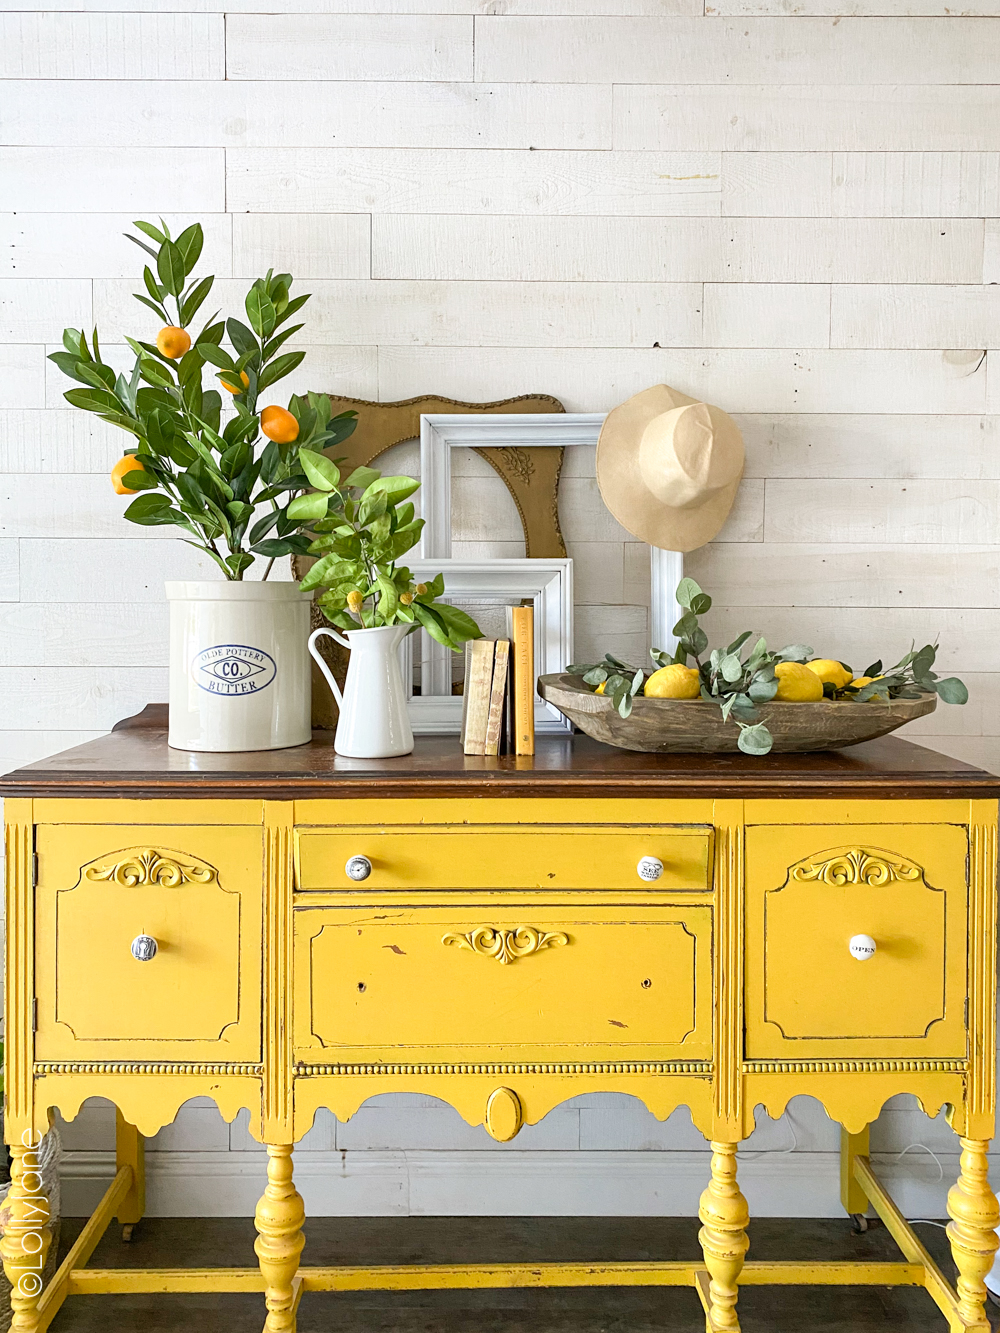 Welcome summer with these EASY entryway decor tips! #entryway #mantel #summerdecor #summertime #summerhomedecor #lemons #lemondecor #lemonhomedecor #yellowbuffet